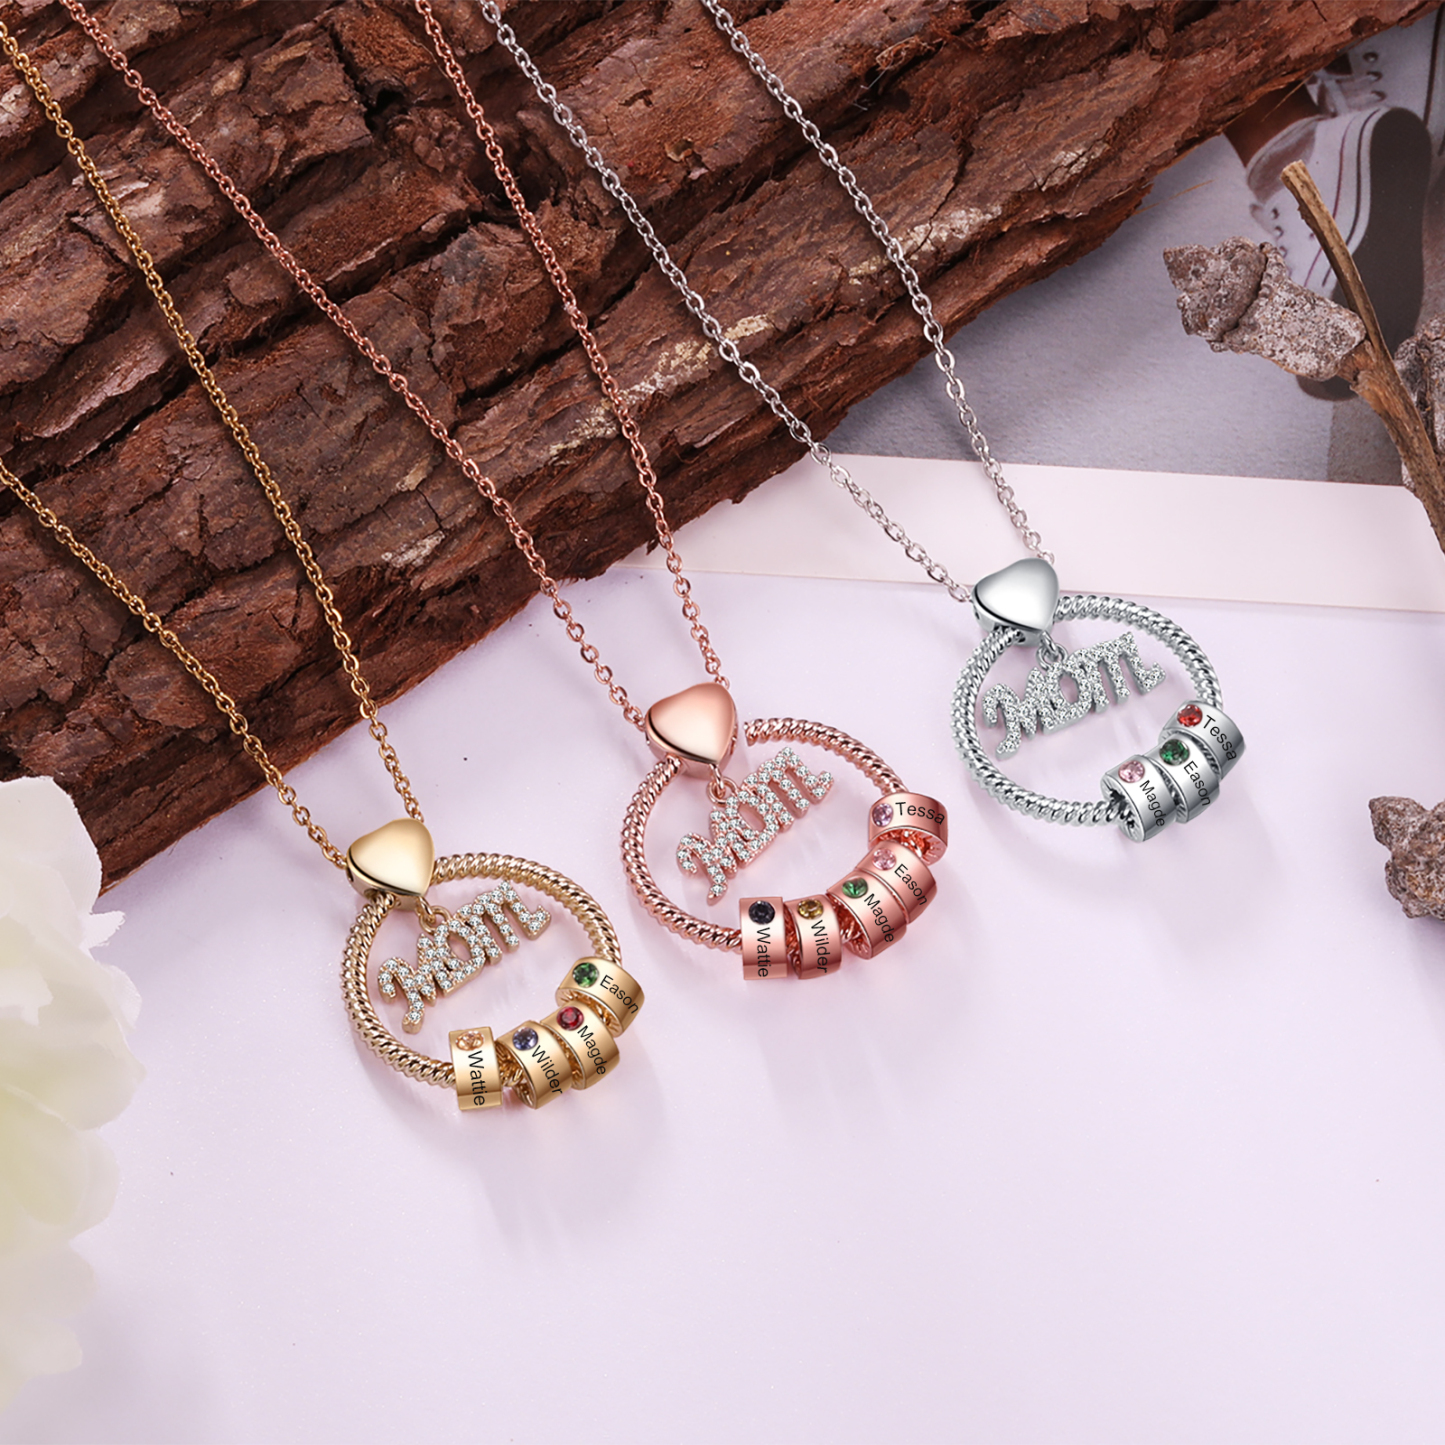 3 Names-Personalized Necklace With 3 Birthstones Engraved Names Gift For Mother